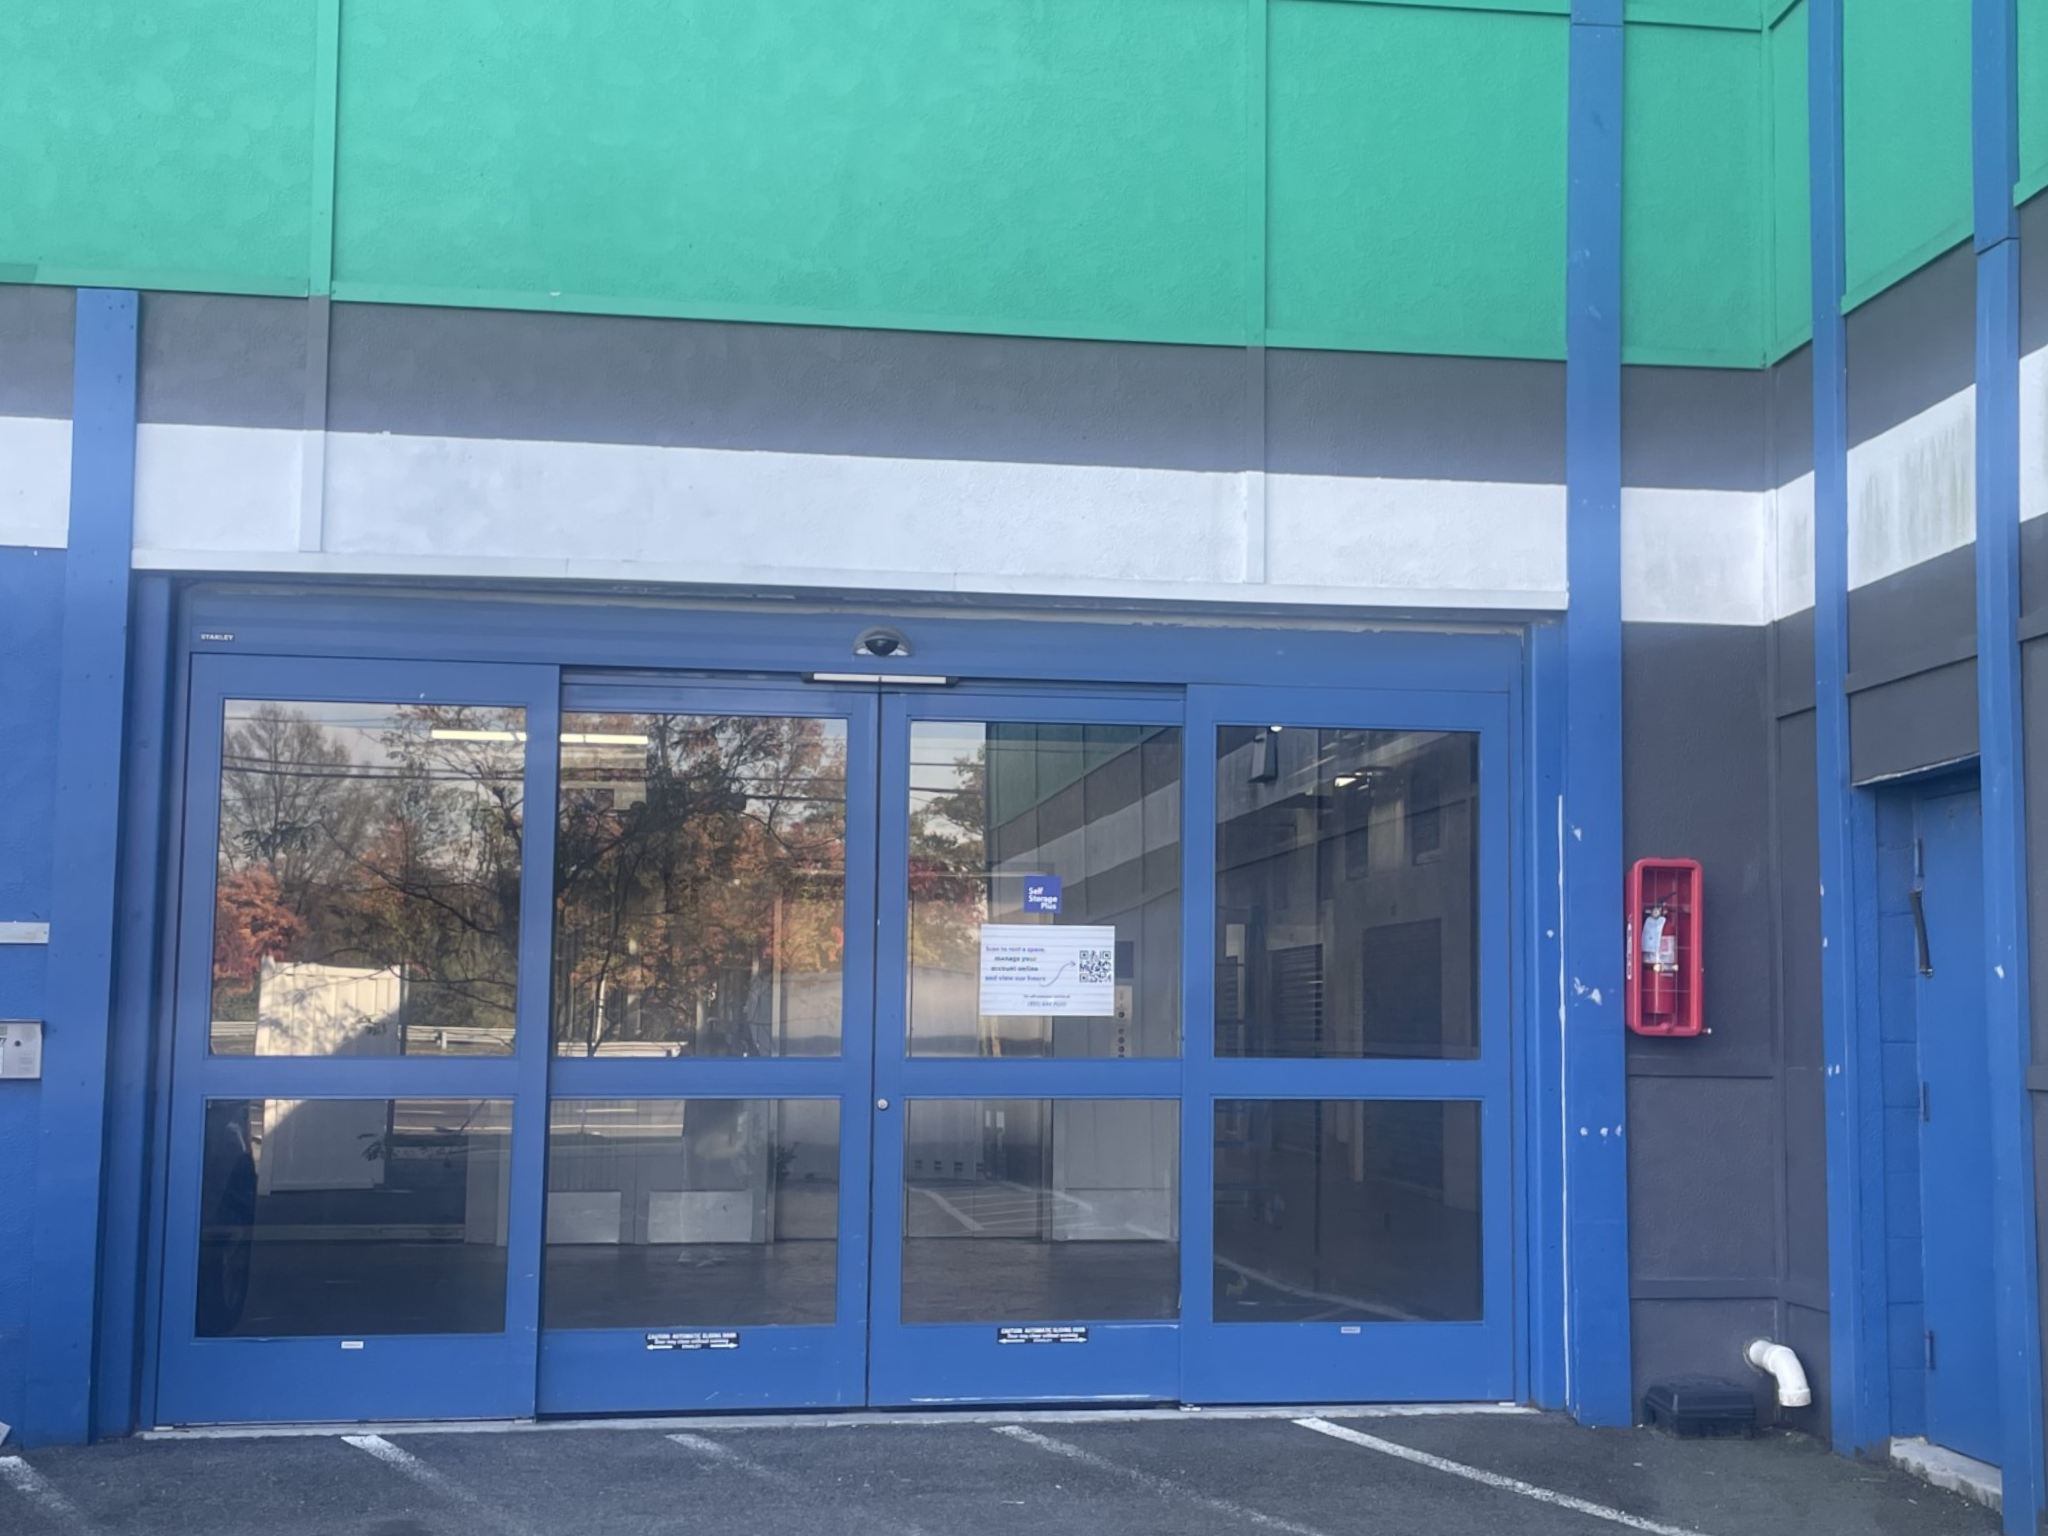 Another Entrance of Self Storage Plus Facility that is located in Hyattsville, MD